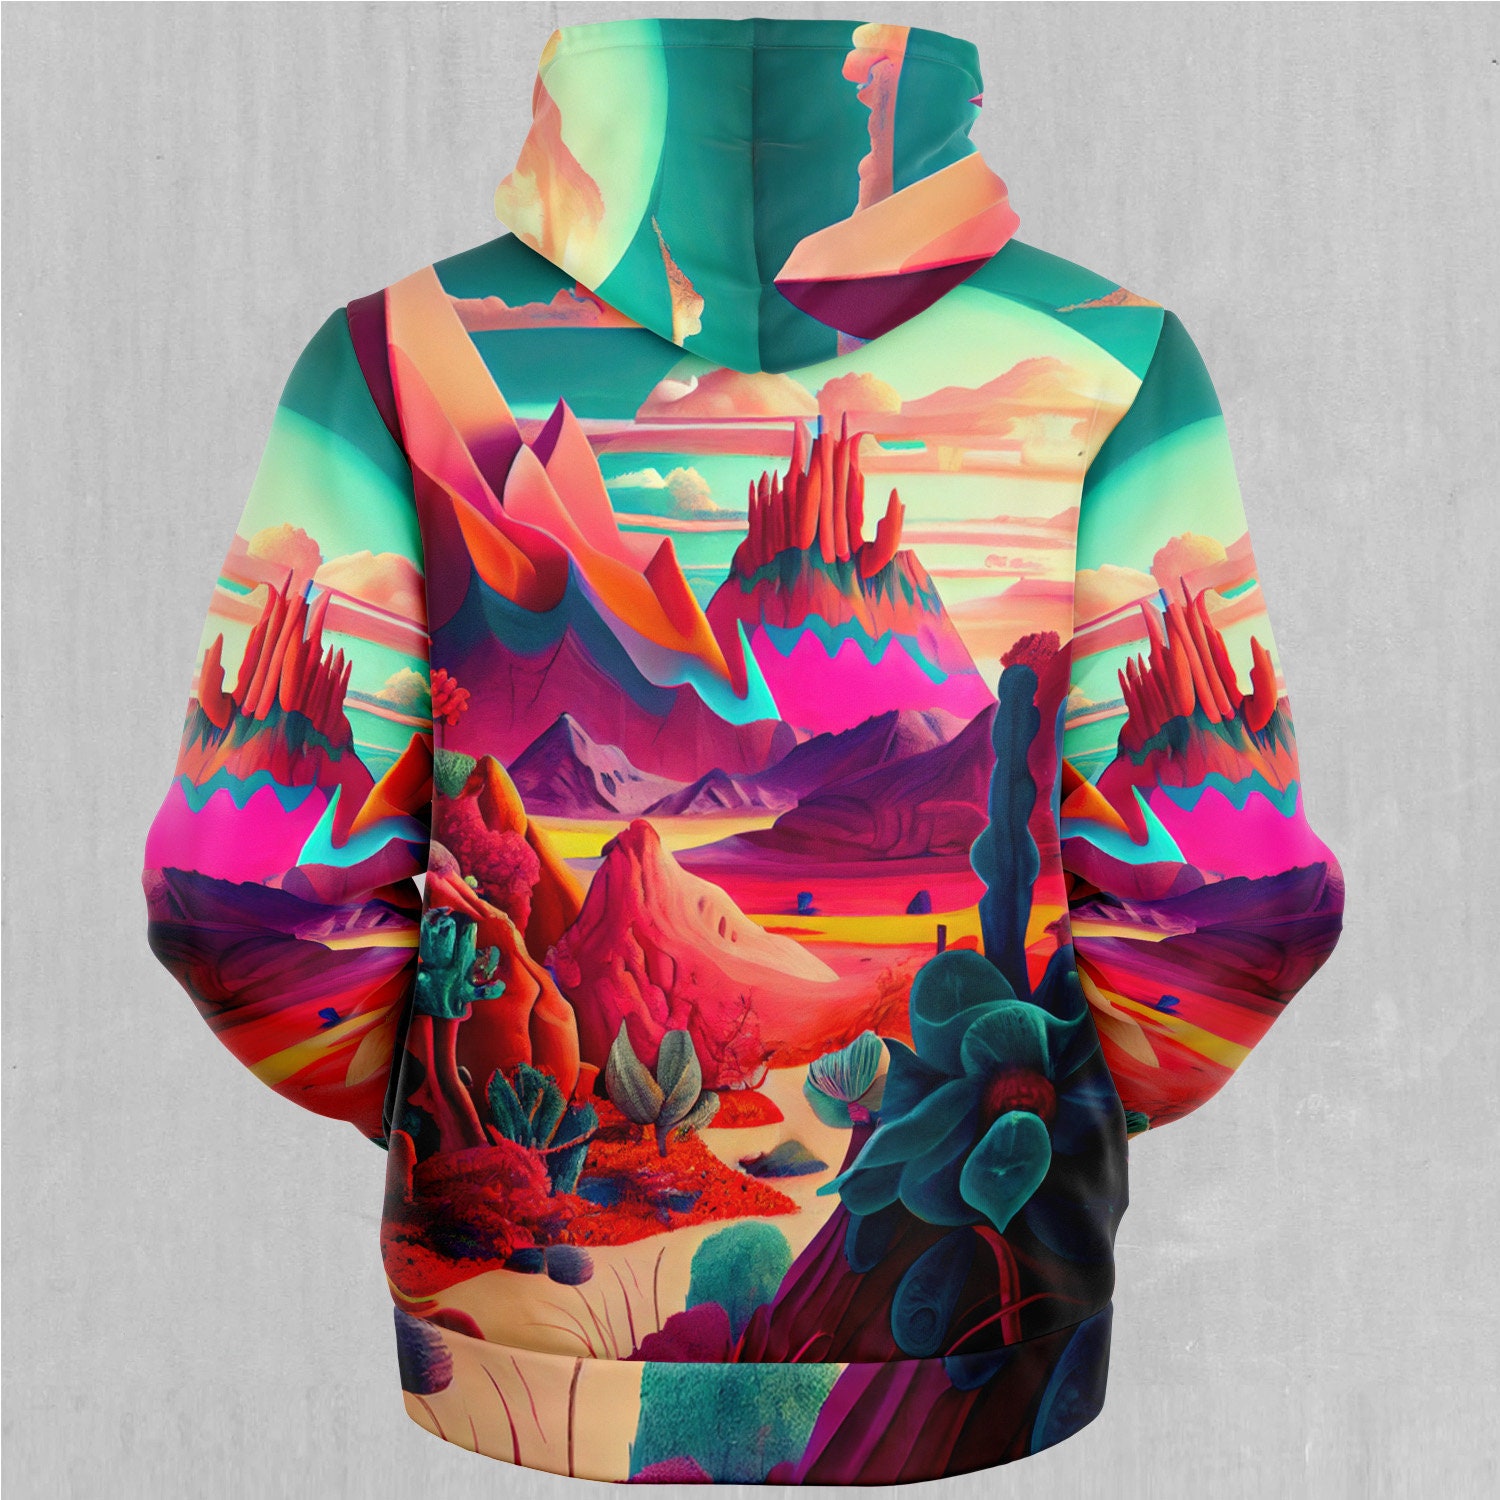 Discover Desert Dreams Psychedelic Abstract Trippy Sherpa Microfleece Zip-Up Hoodie